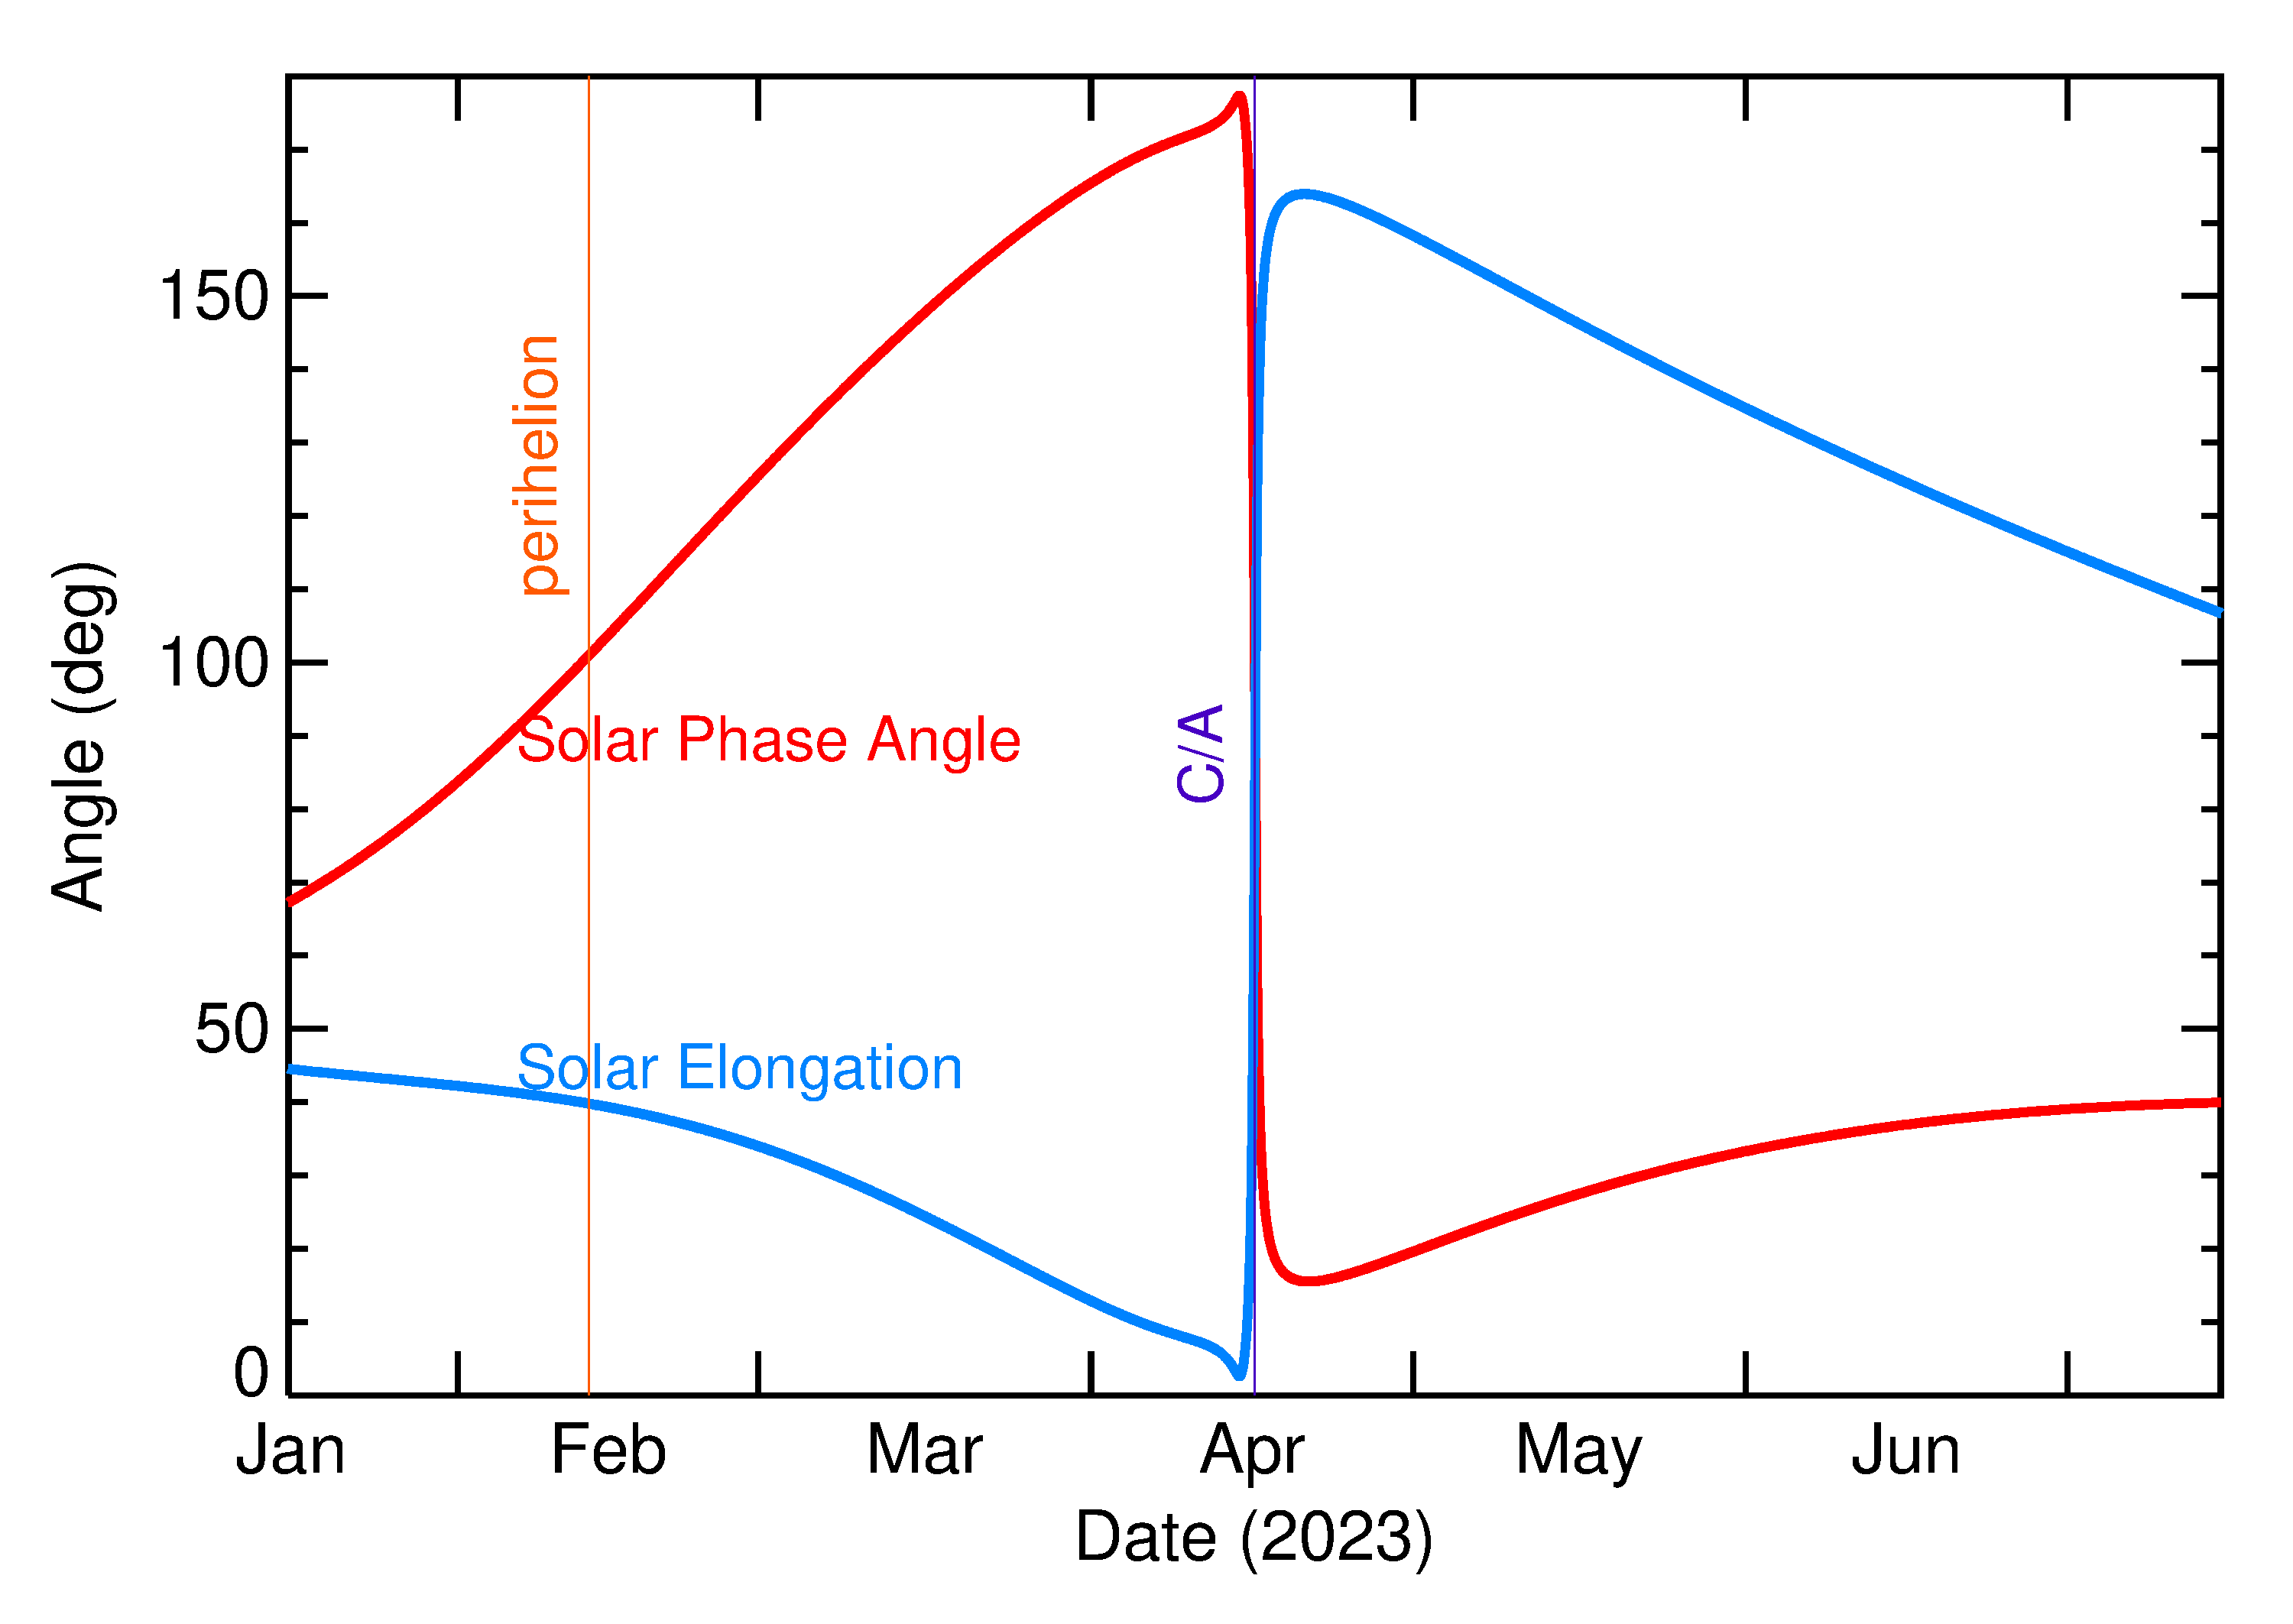 Solar Elongation and Solar Phase Angle of 2023 HZ in the months around closest approach